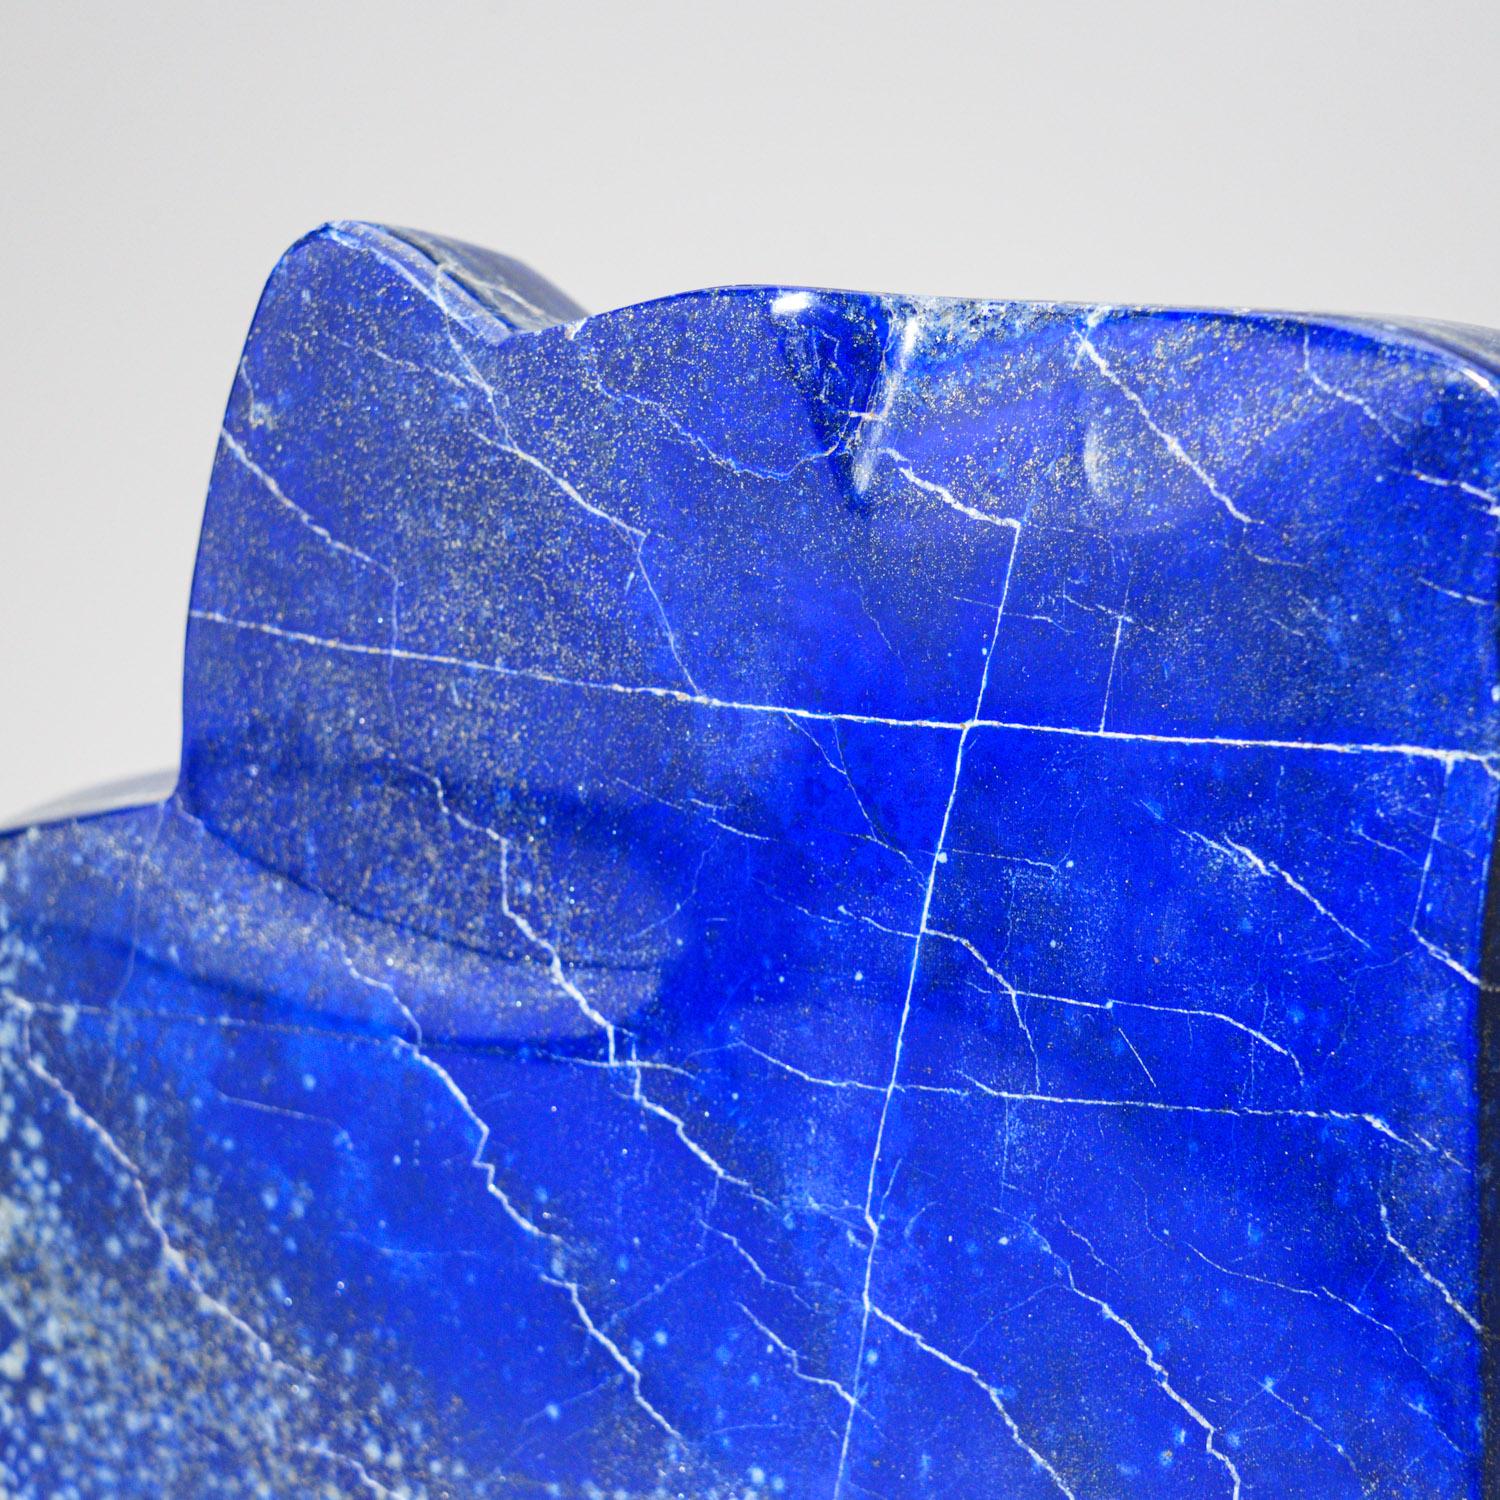 Crystal Polished Lapis Lazuli Freeform from Afghanistan (10.2 lbs) For Sale